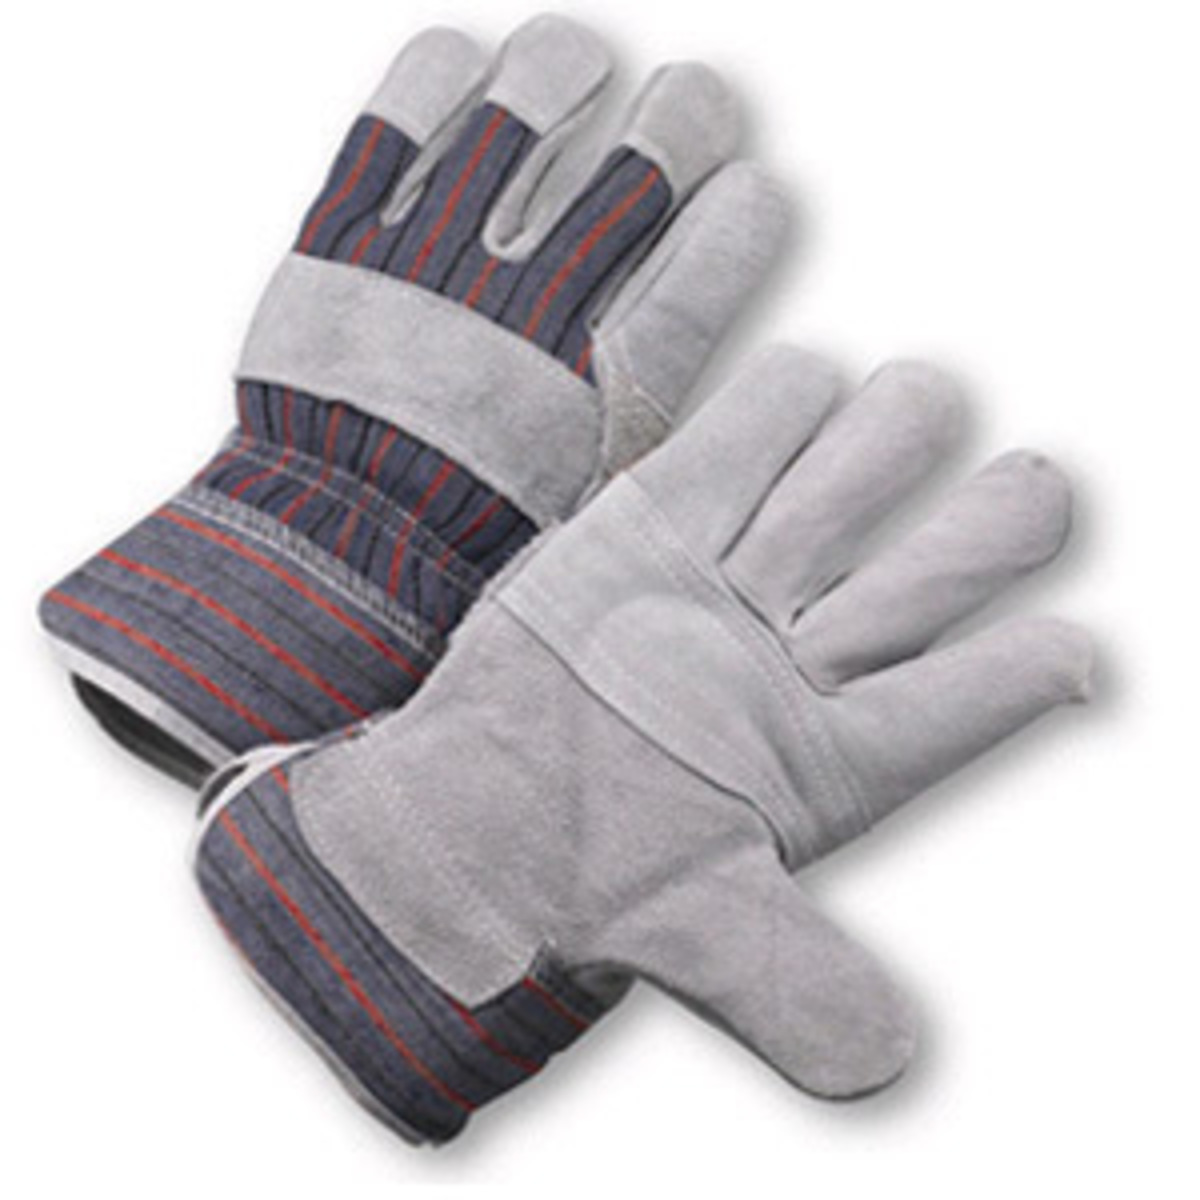 Leather Palm Gloves for Sale online at autumn supply